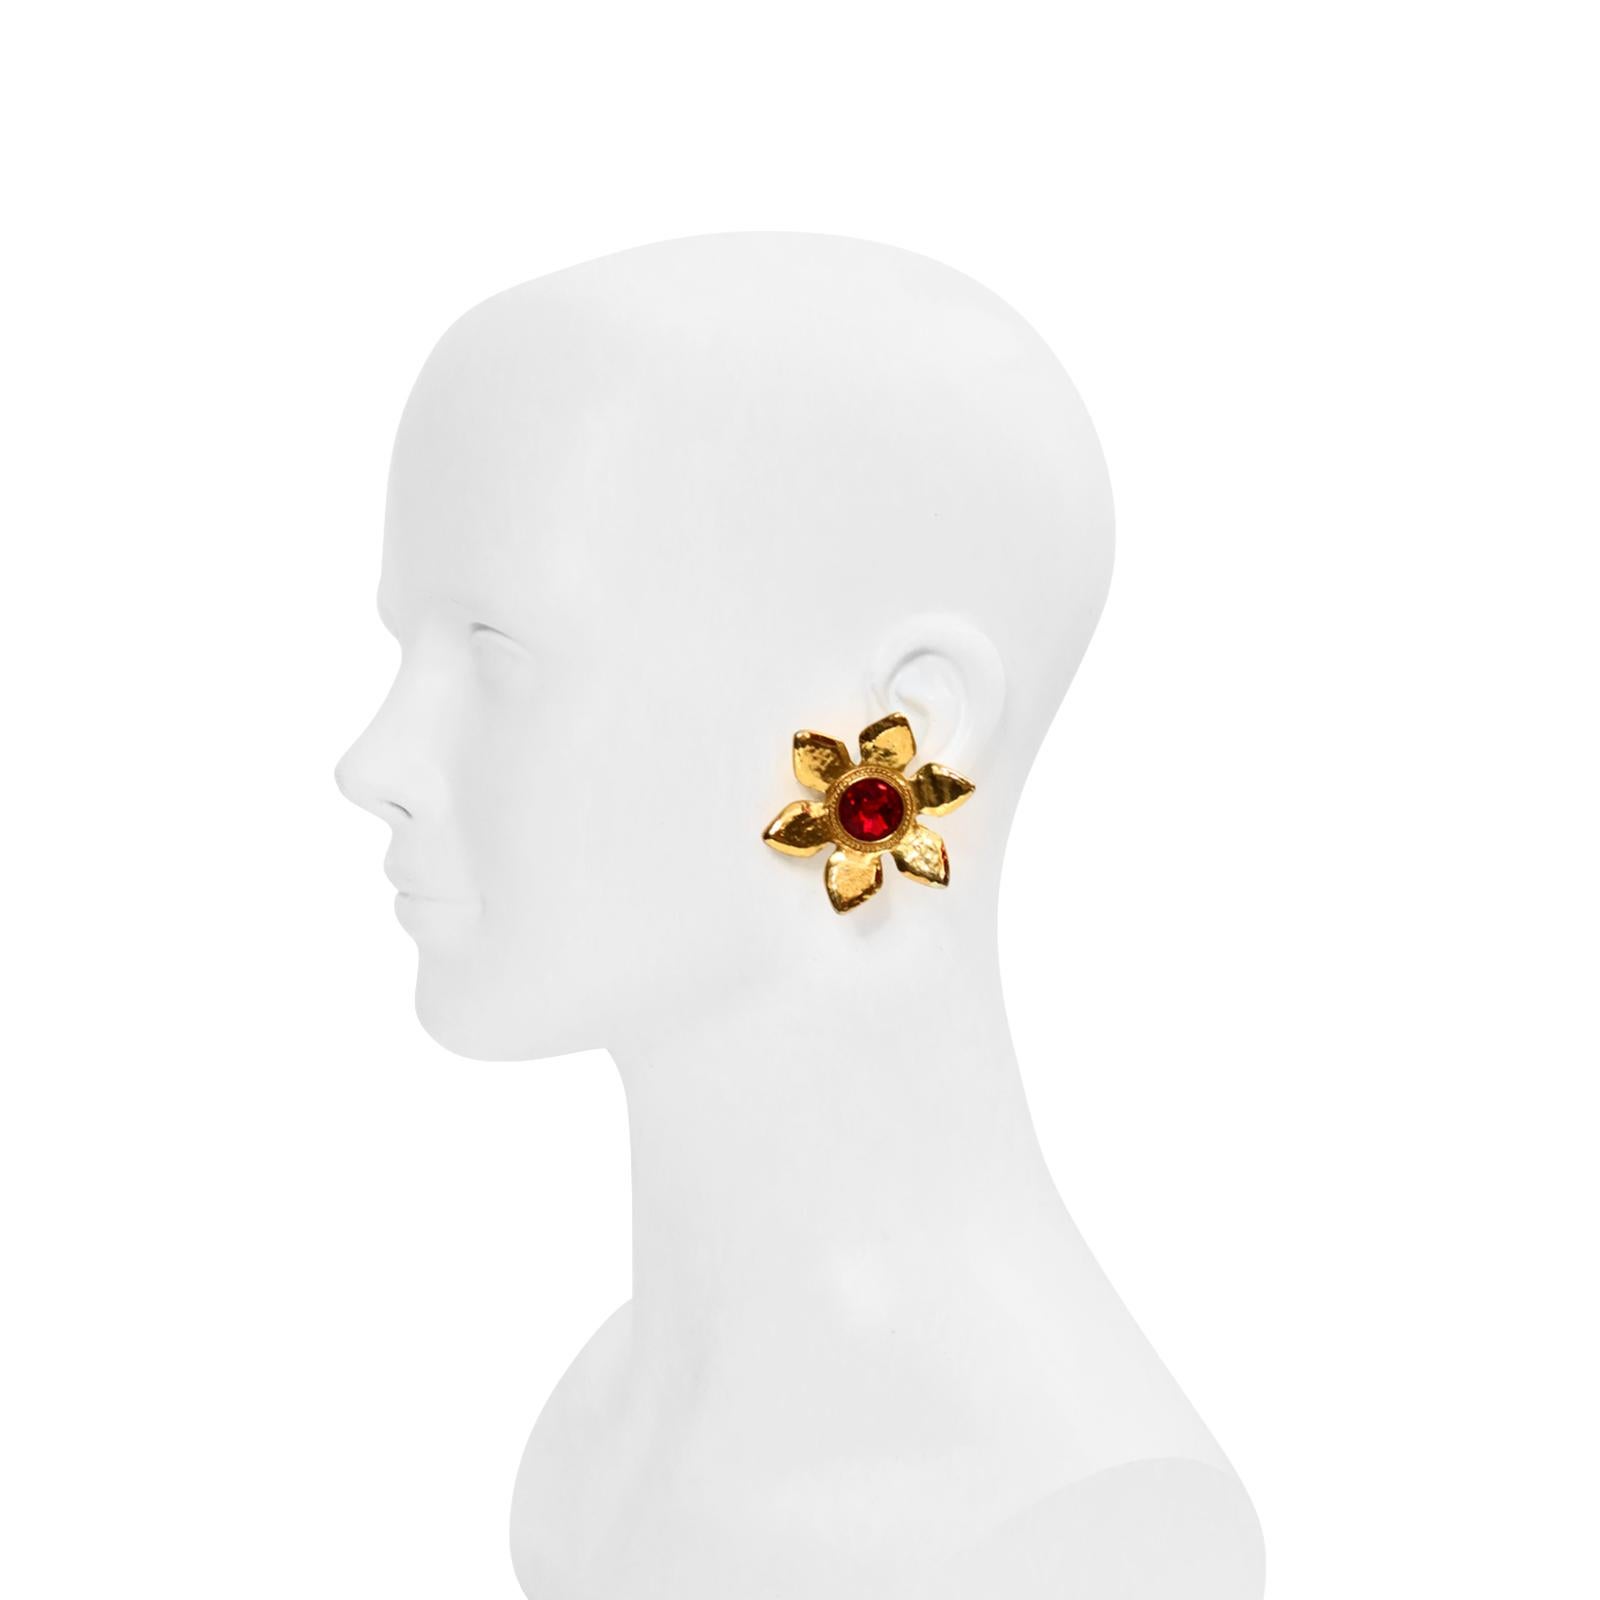 Vintage Yves Saint Laurent YSL Gold Flower with Red Center Earrings Circa 1980s For Sale 2